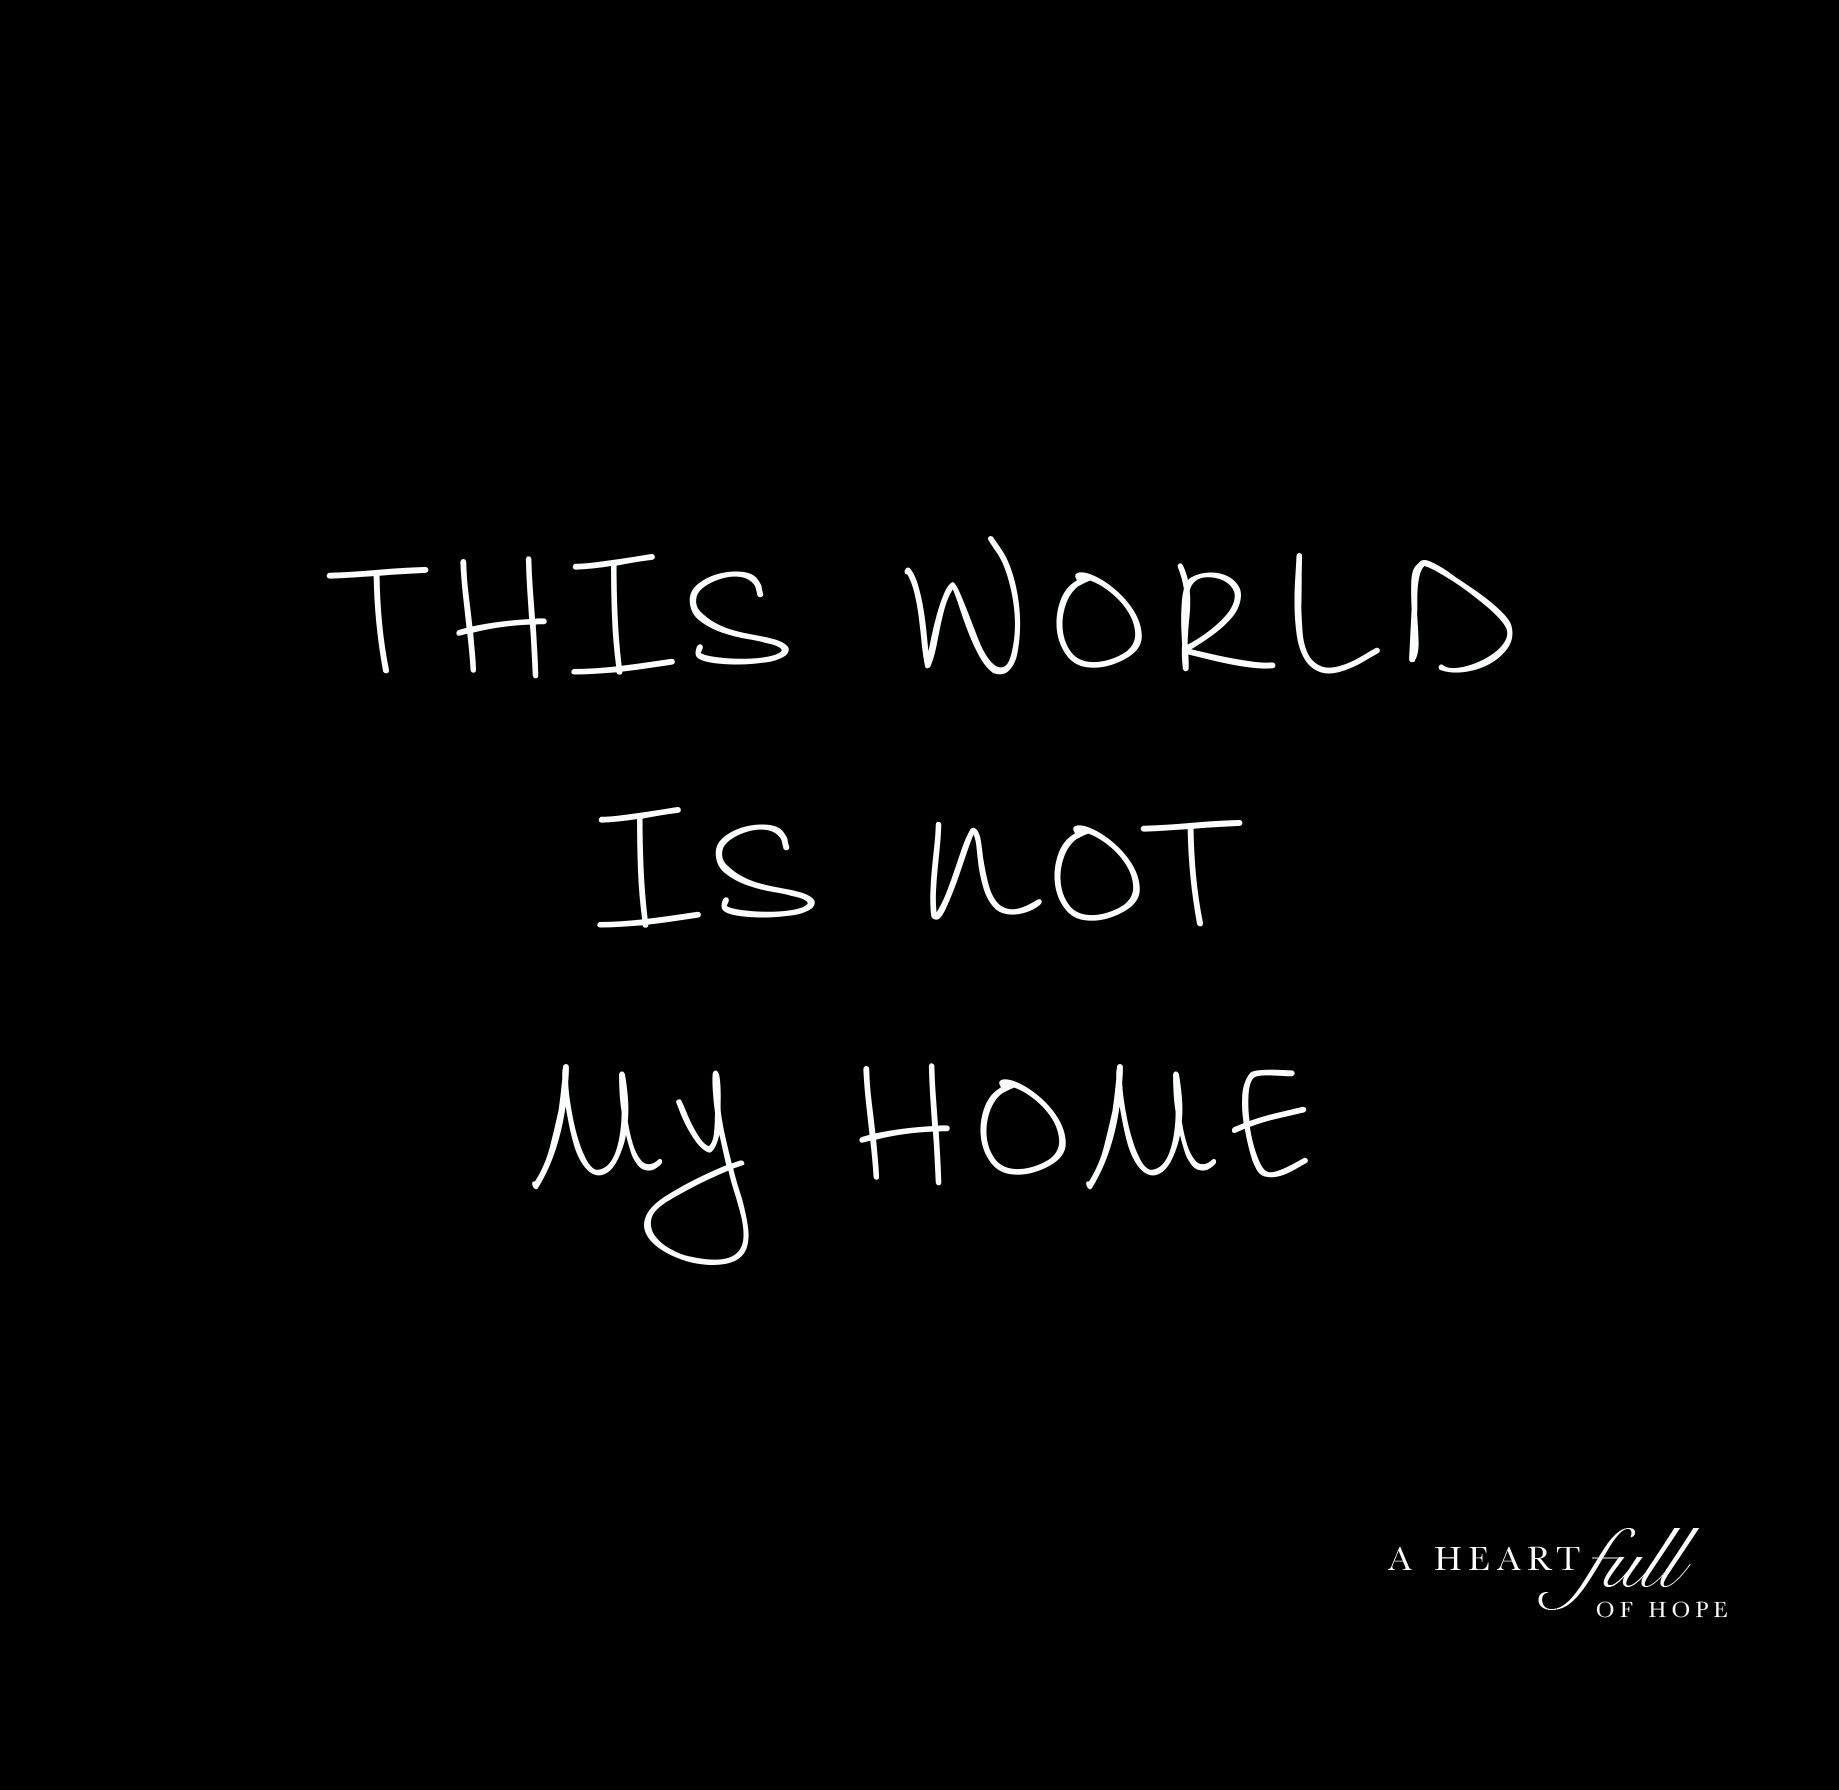 This world is not my home.